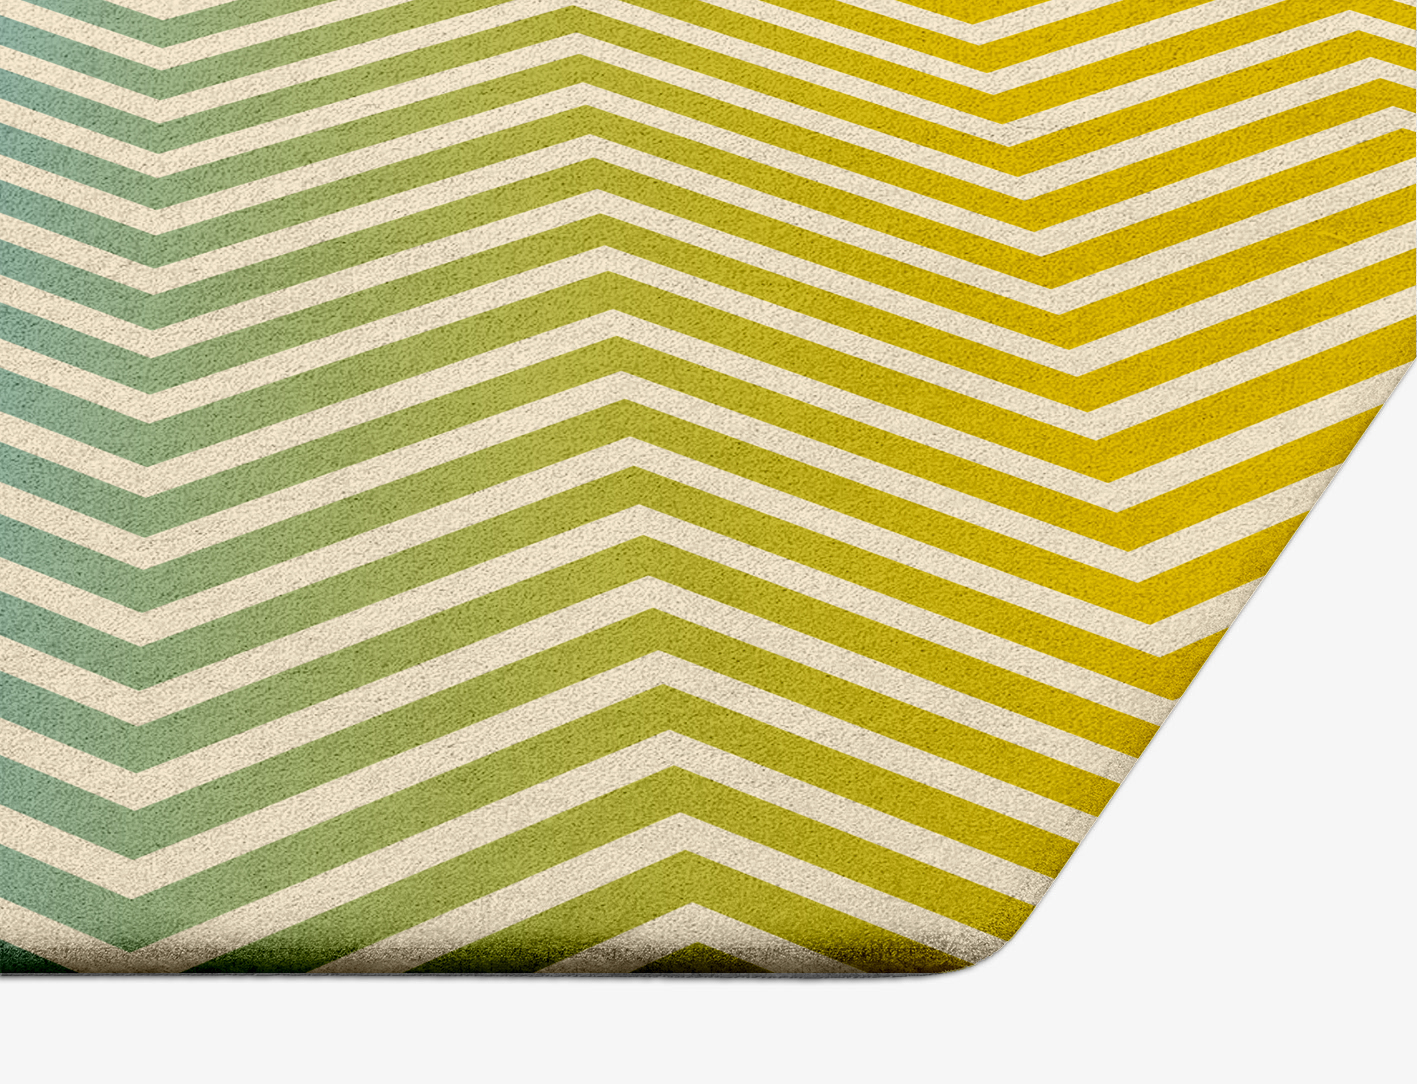 Zigzag Ombre Hexagon Hand Tufted Pure Wool Custom Rug by Rug Artisan